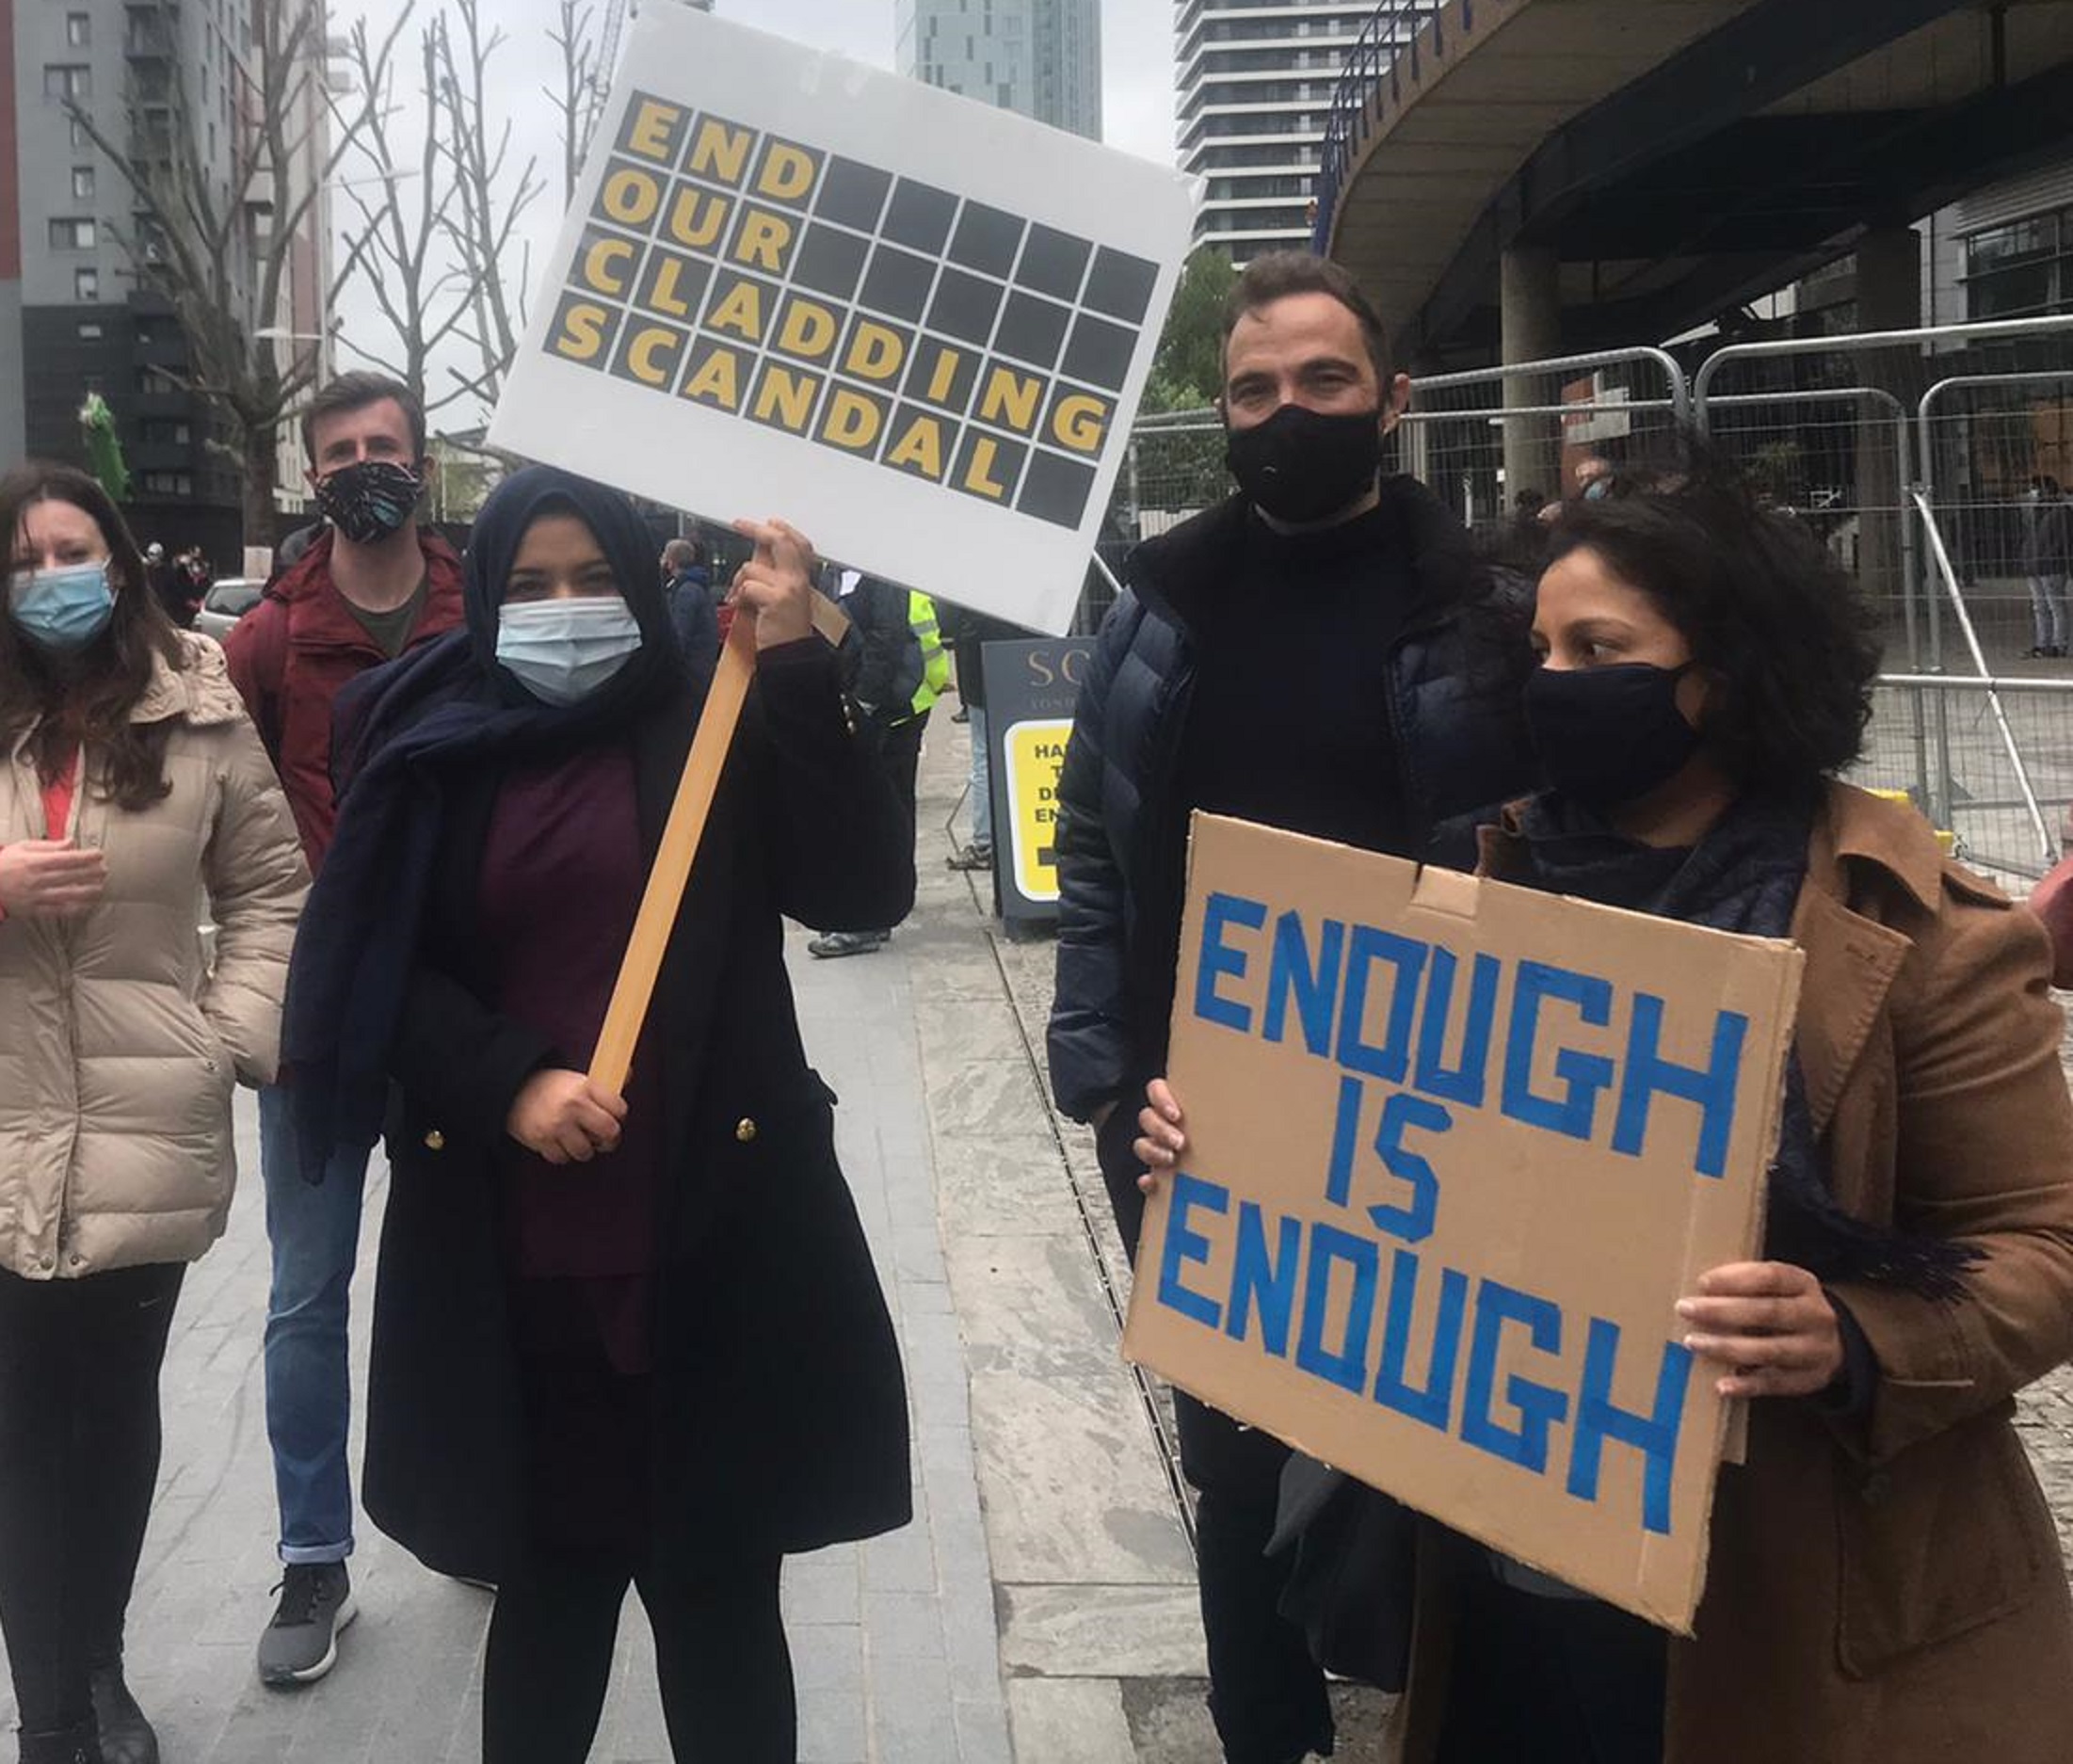 Signs held by protesters, which read 'END OUR CLADDING SCANDAL' and 'ENOUGH IS ENOUGH' - A woman with her head covered, wearing a light blue mask, holds a sign with yellow writing on a black background. To her right, a woman wearing a black mask and a brown coat holds a cardboard sign with blue lettering